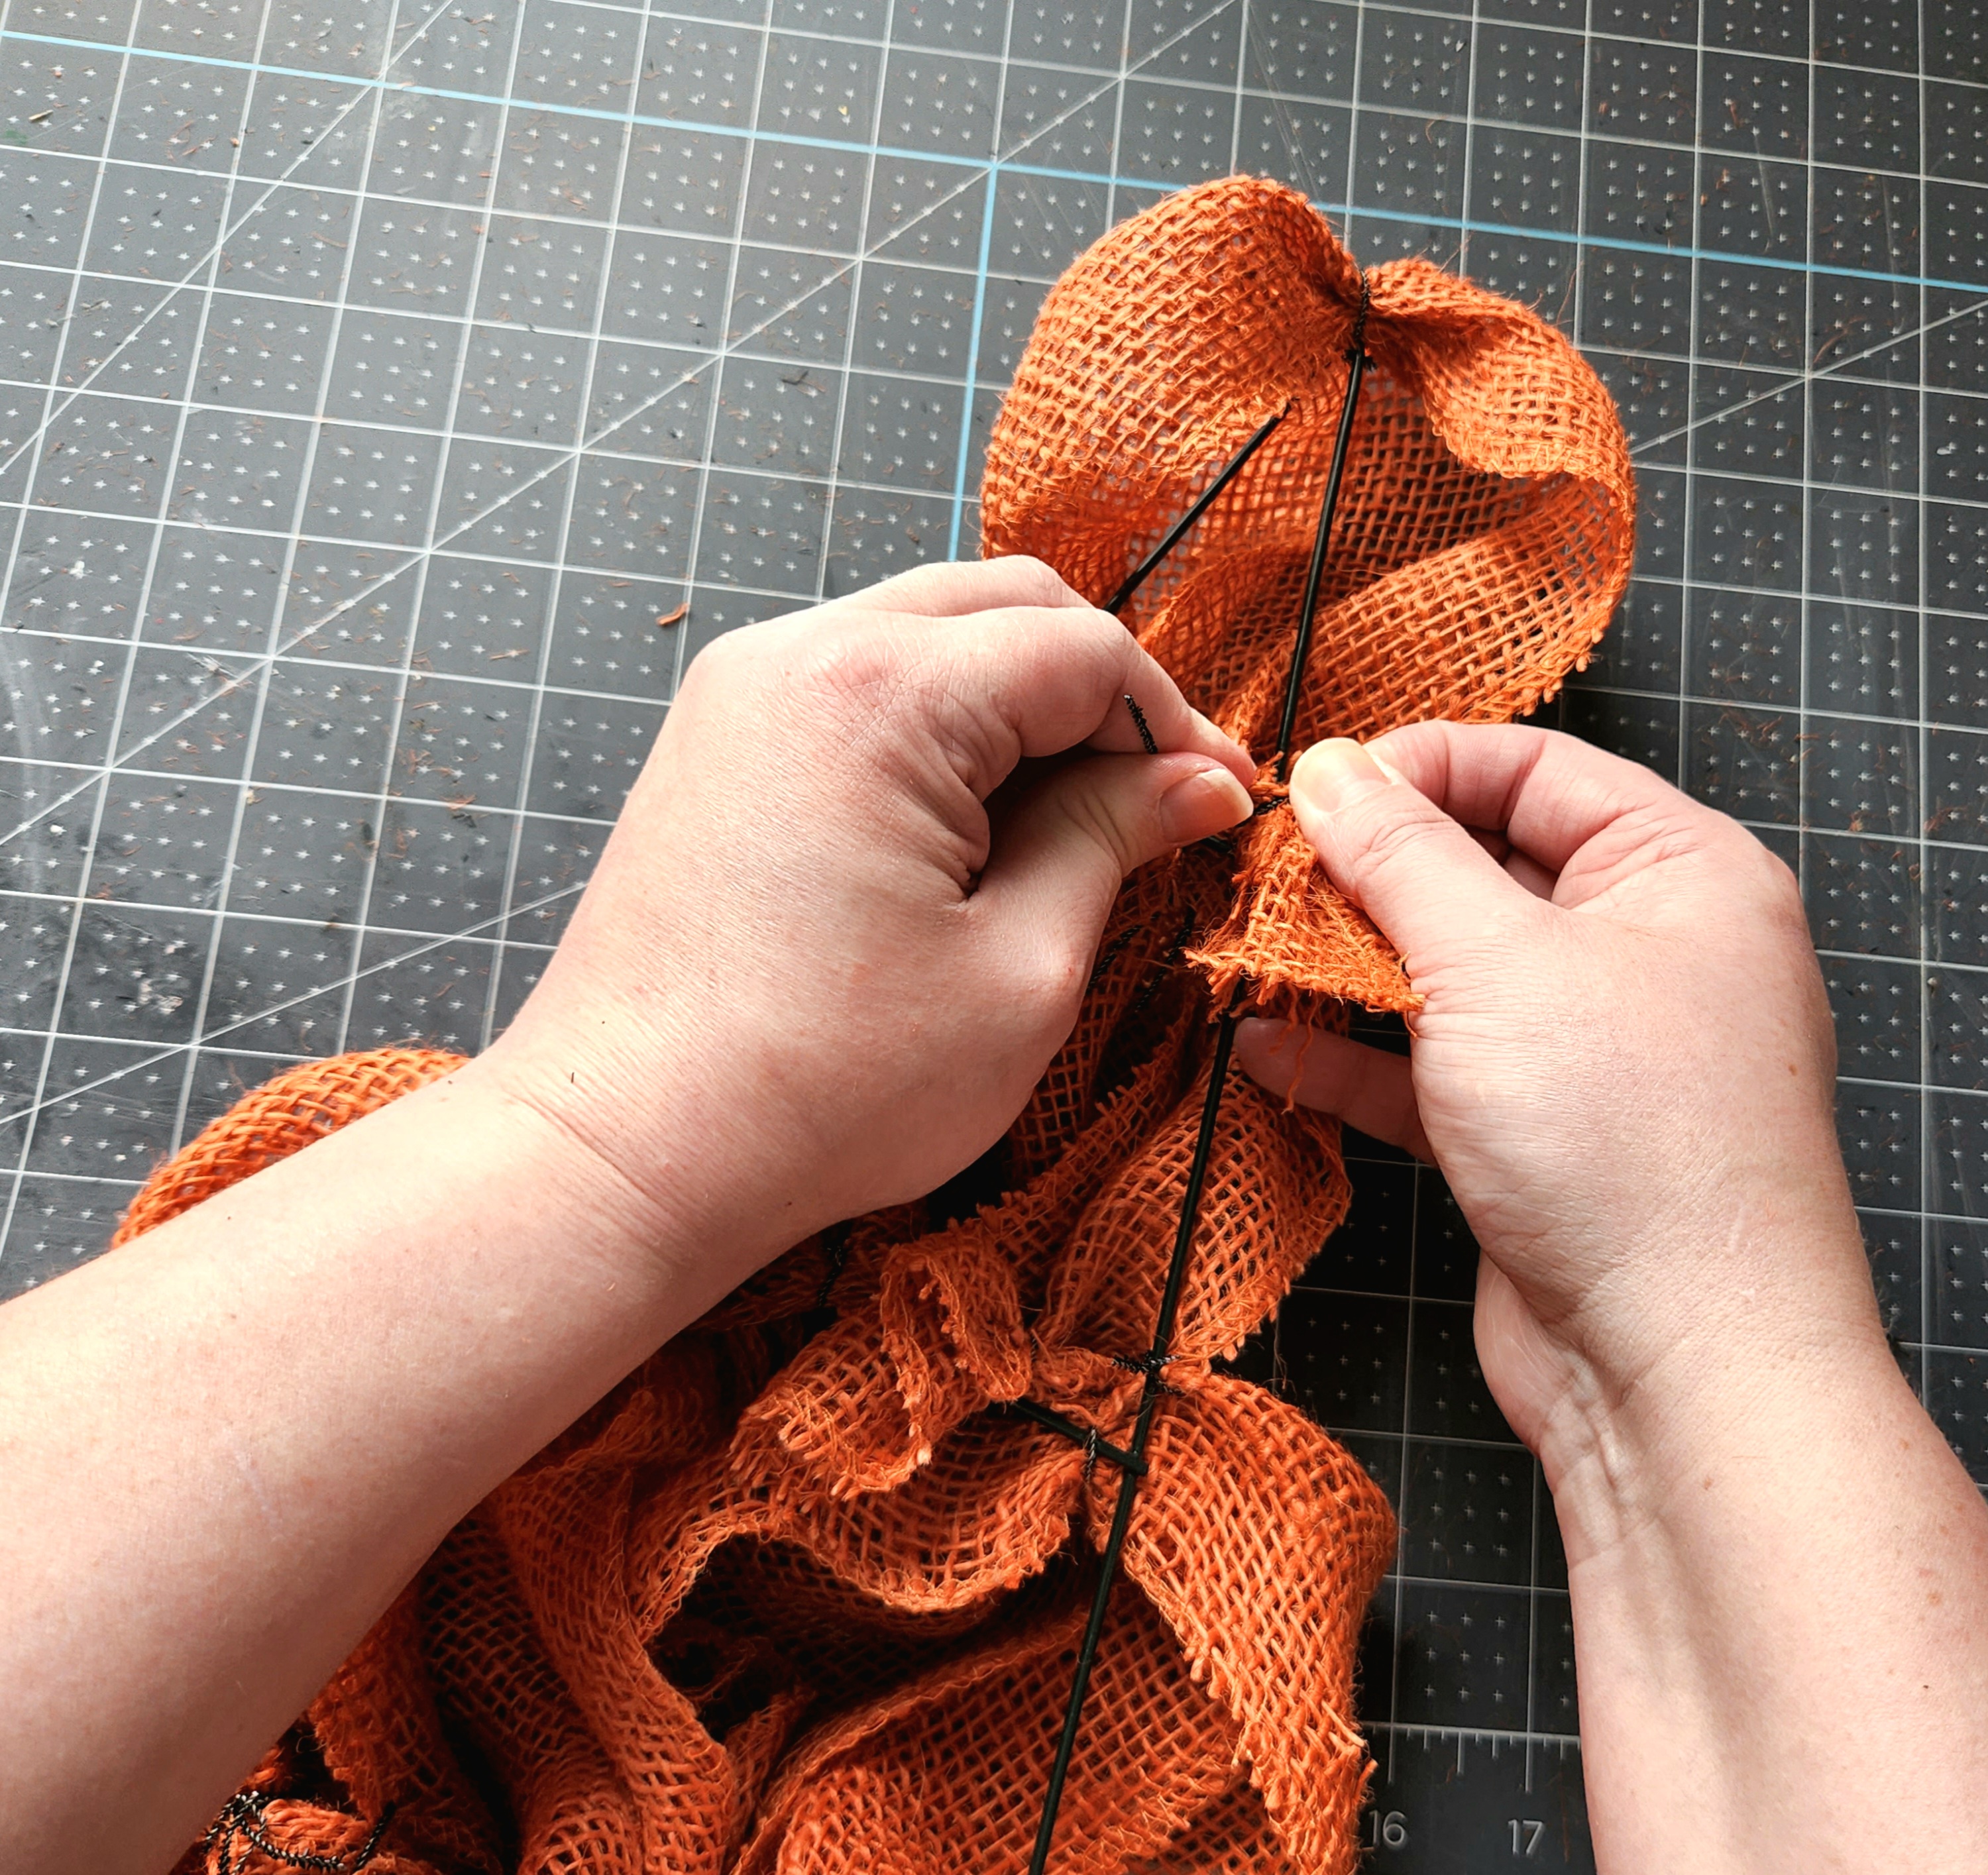 Attaching the orange burlap to the last wire in the middle of the carrot wreath form.